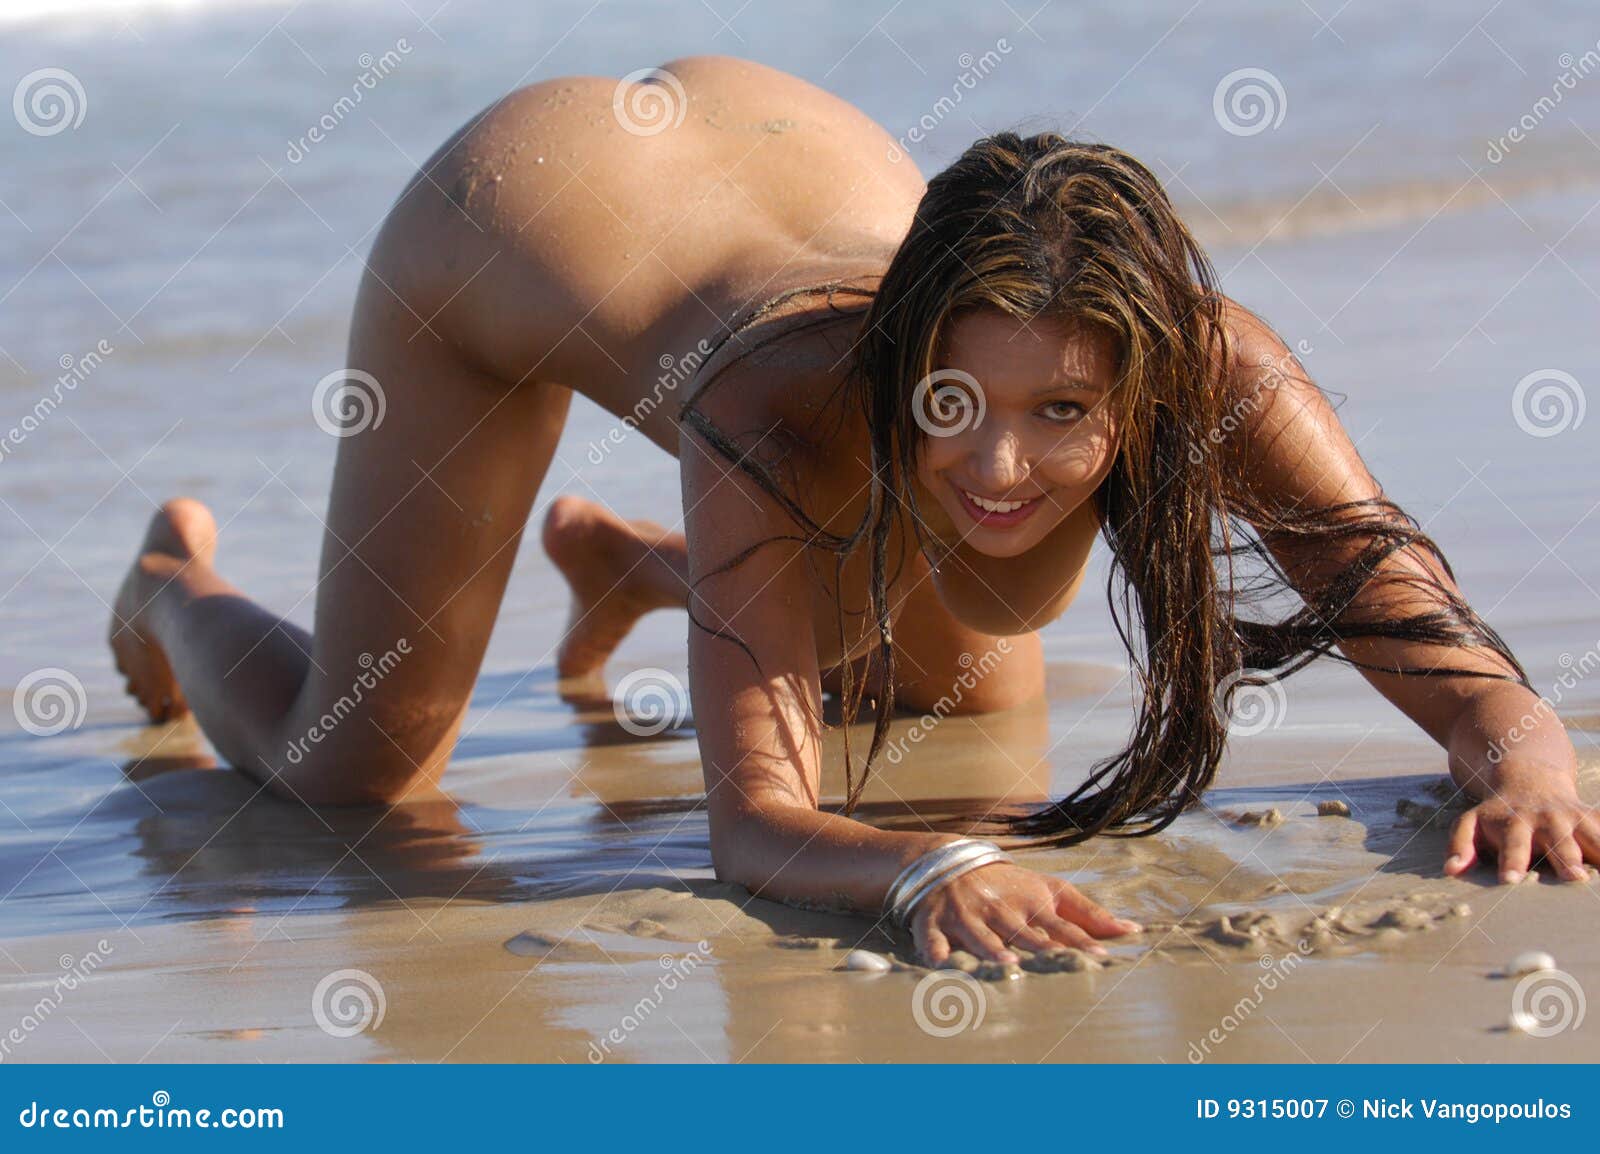 barry spurr add photo nude beach girls pictures